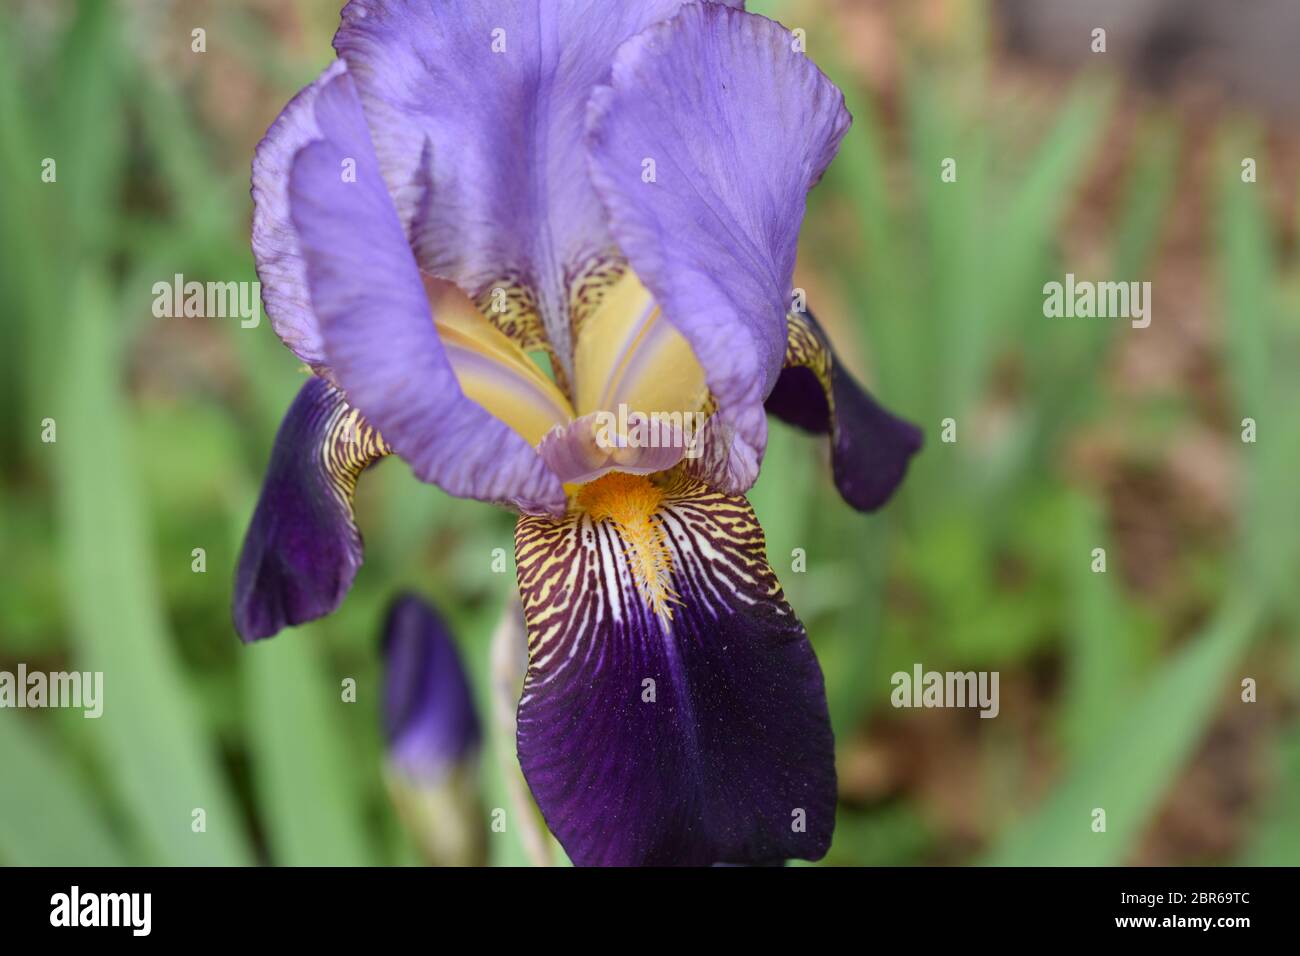 Large, multi colored, German bearded iris flower on a blurred green background Stock Photo